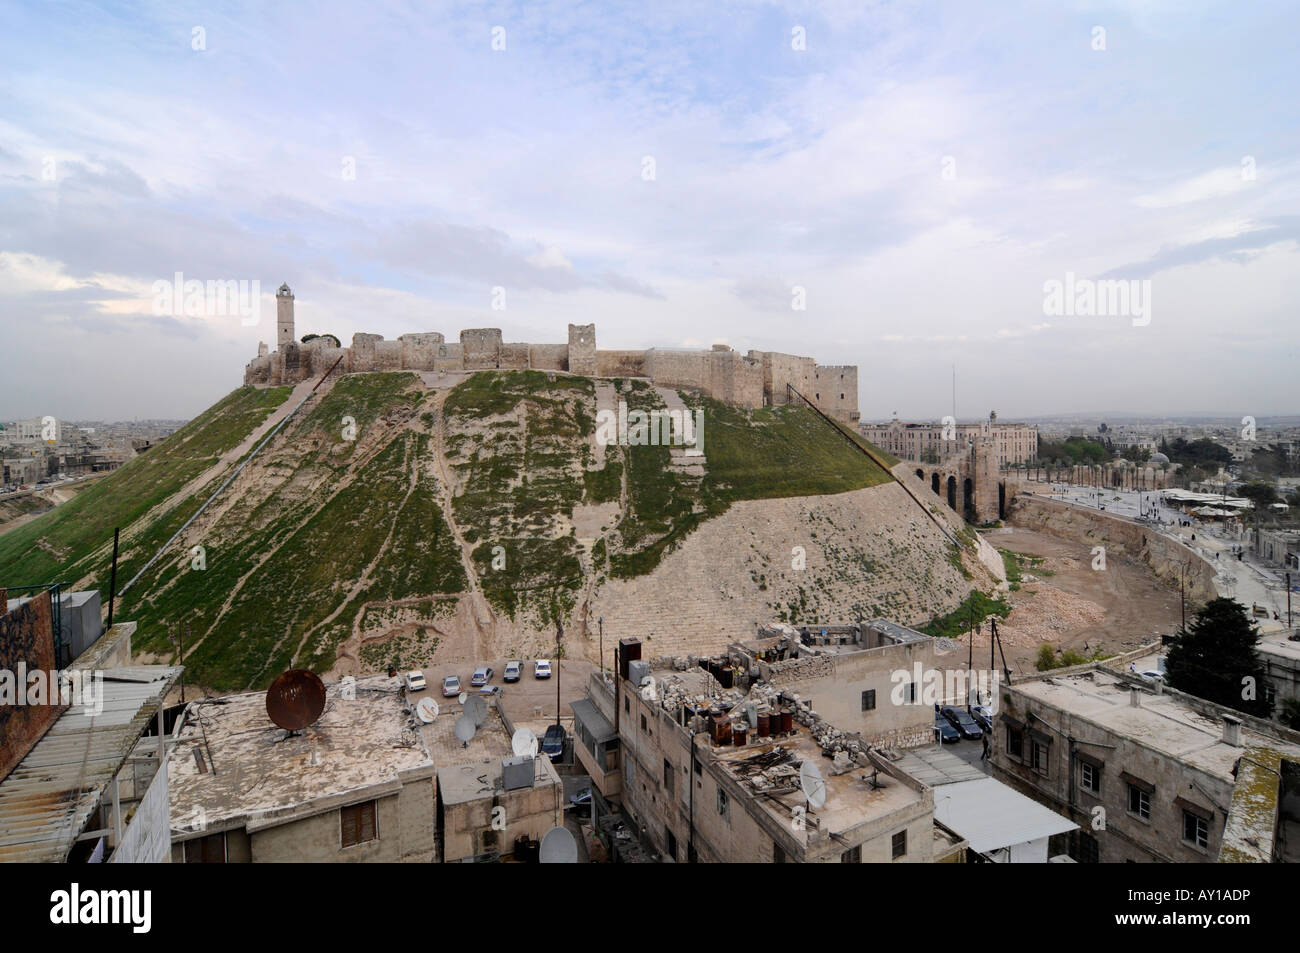 An overview of the citadel in the old town of Aleppo, Syria Stock Photo